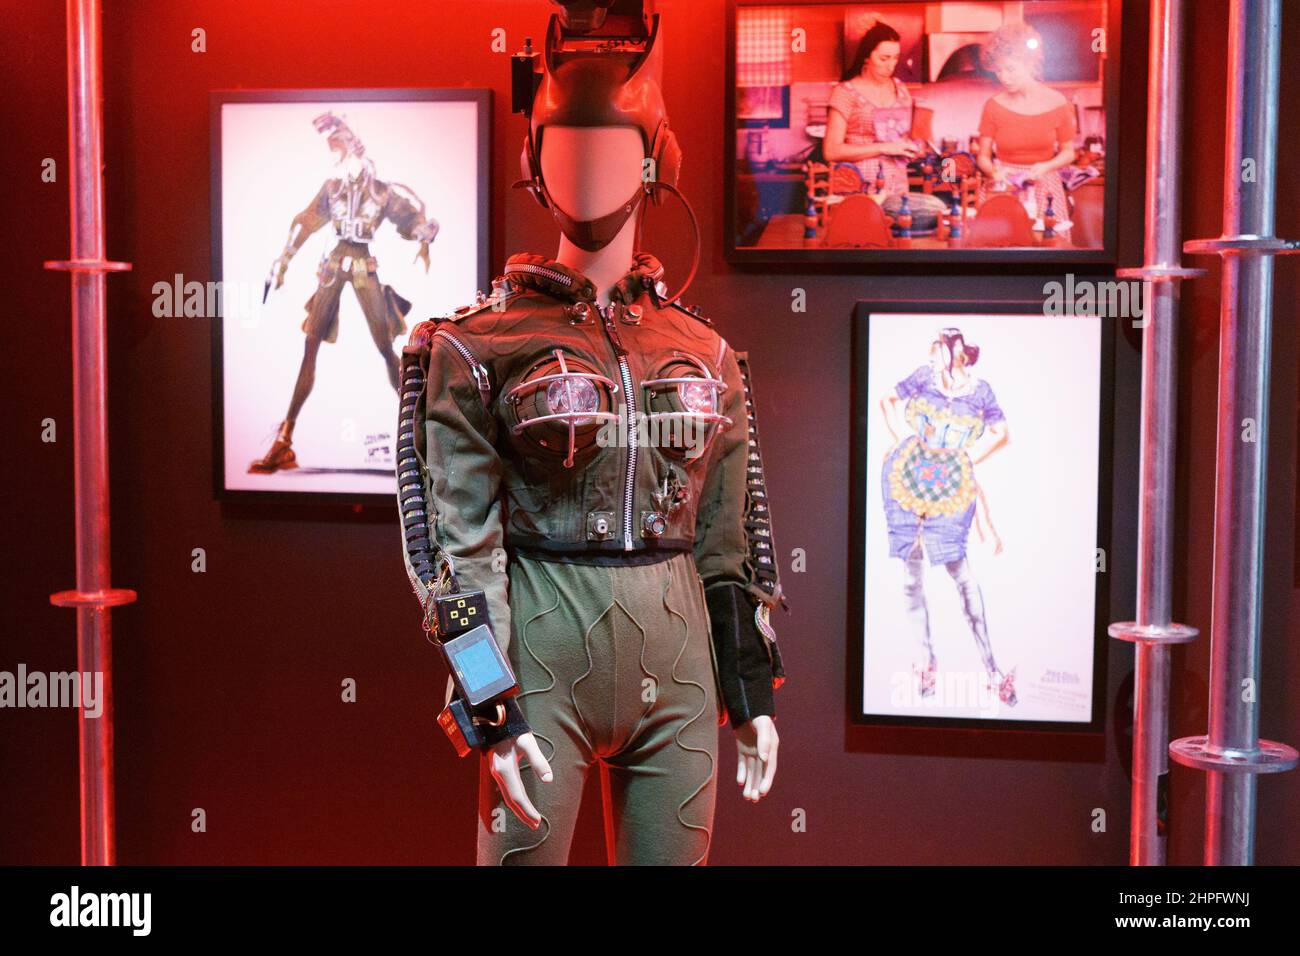 Inheems spreken temperen Madrid, Spain. 20th Feb, 2022. A suit worn by Vistoria Abril in the movie  Kika seen on display during the exhibition 'Cinema and fashion' by  Jean-Paul Gaultier at CaixaForum Madrid. (Photo by